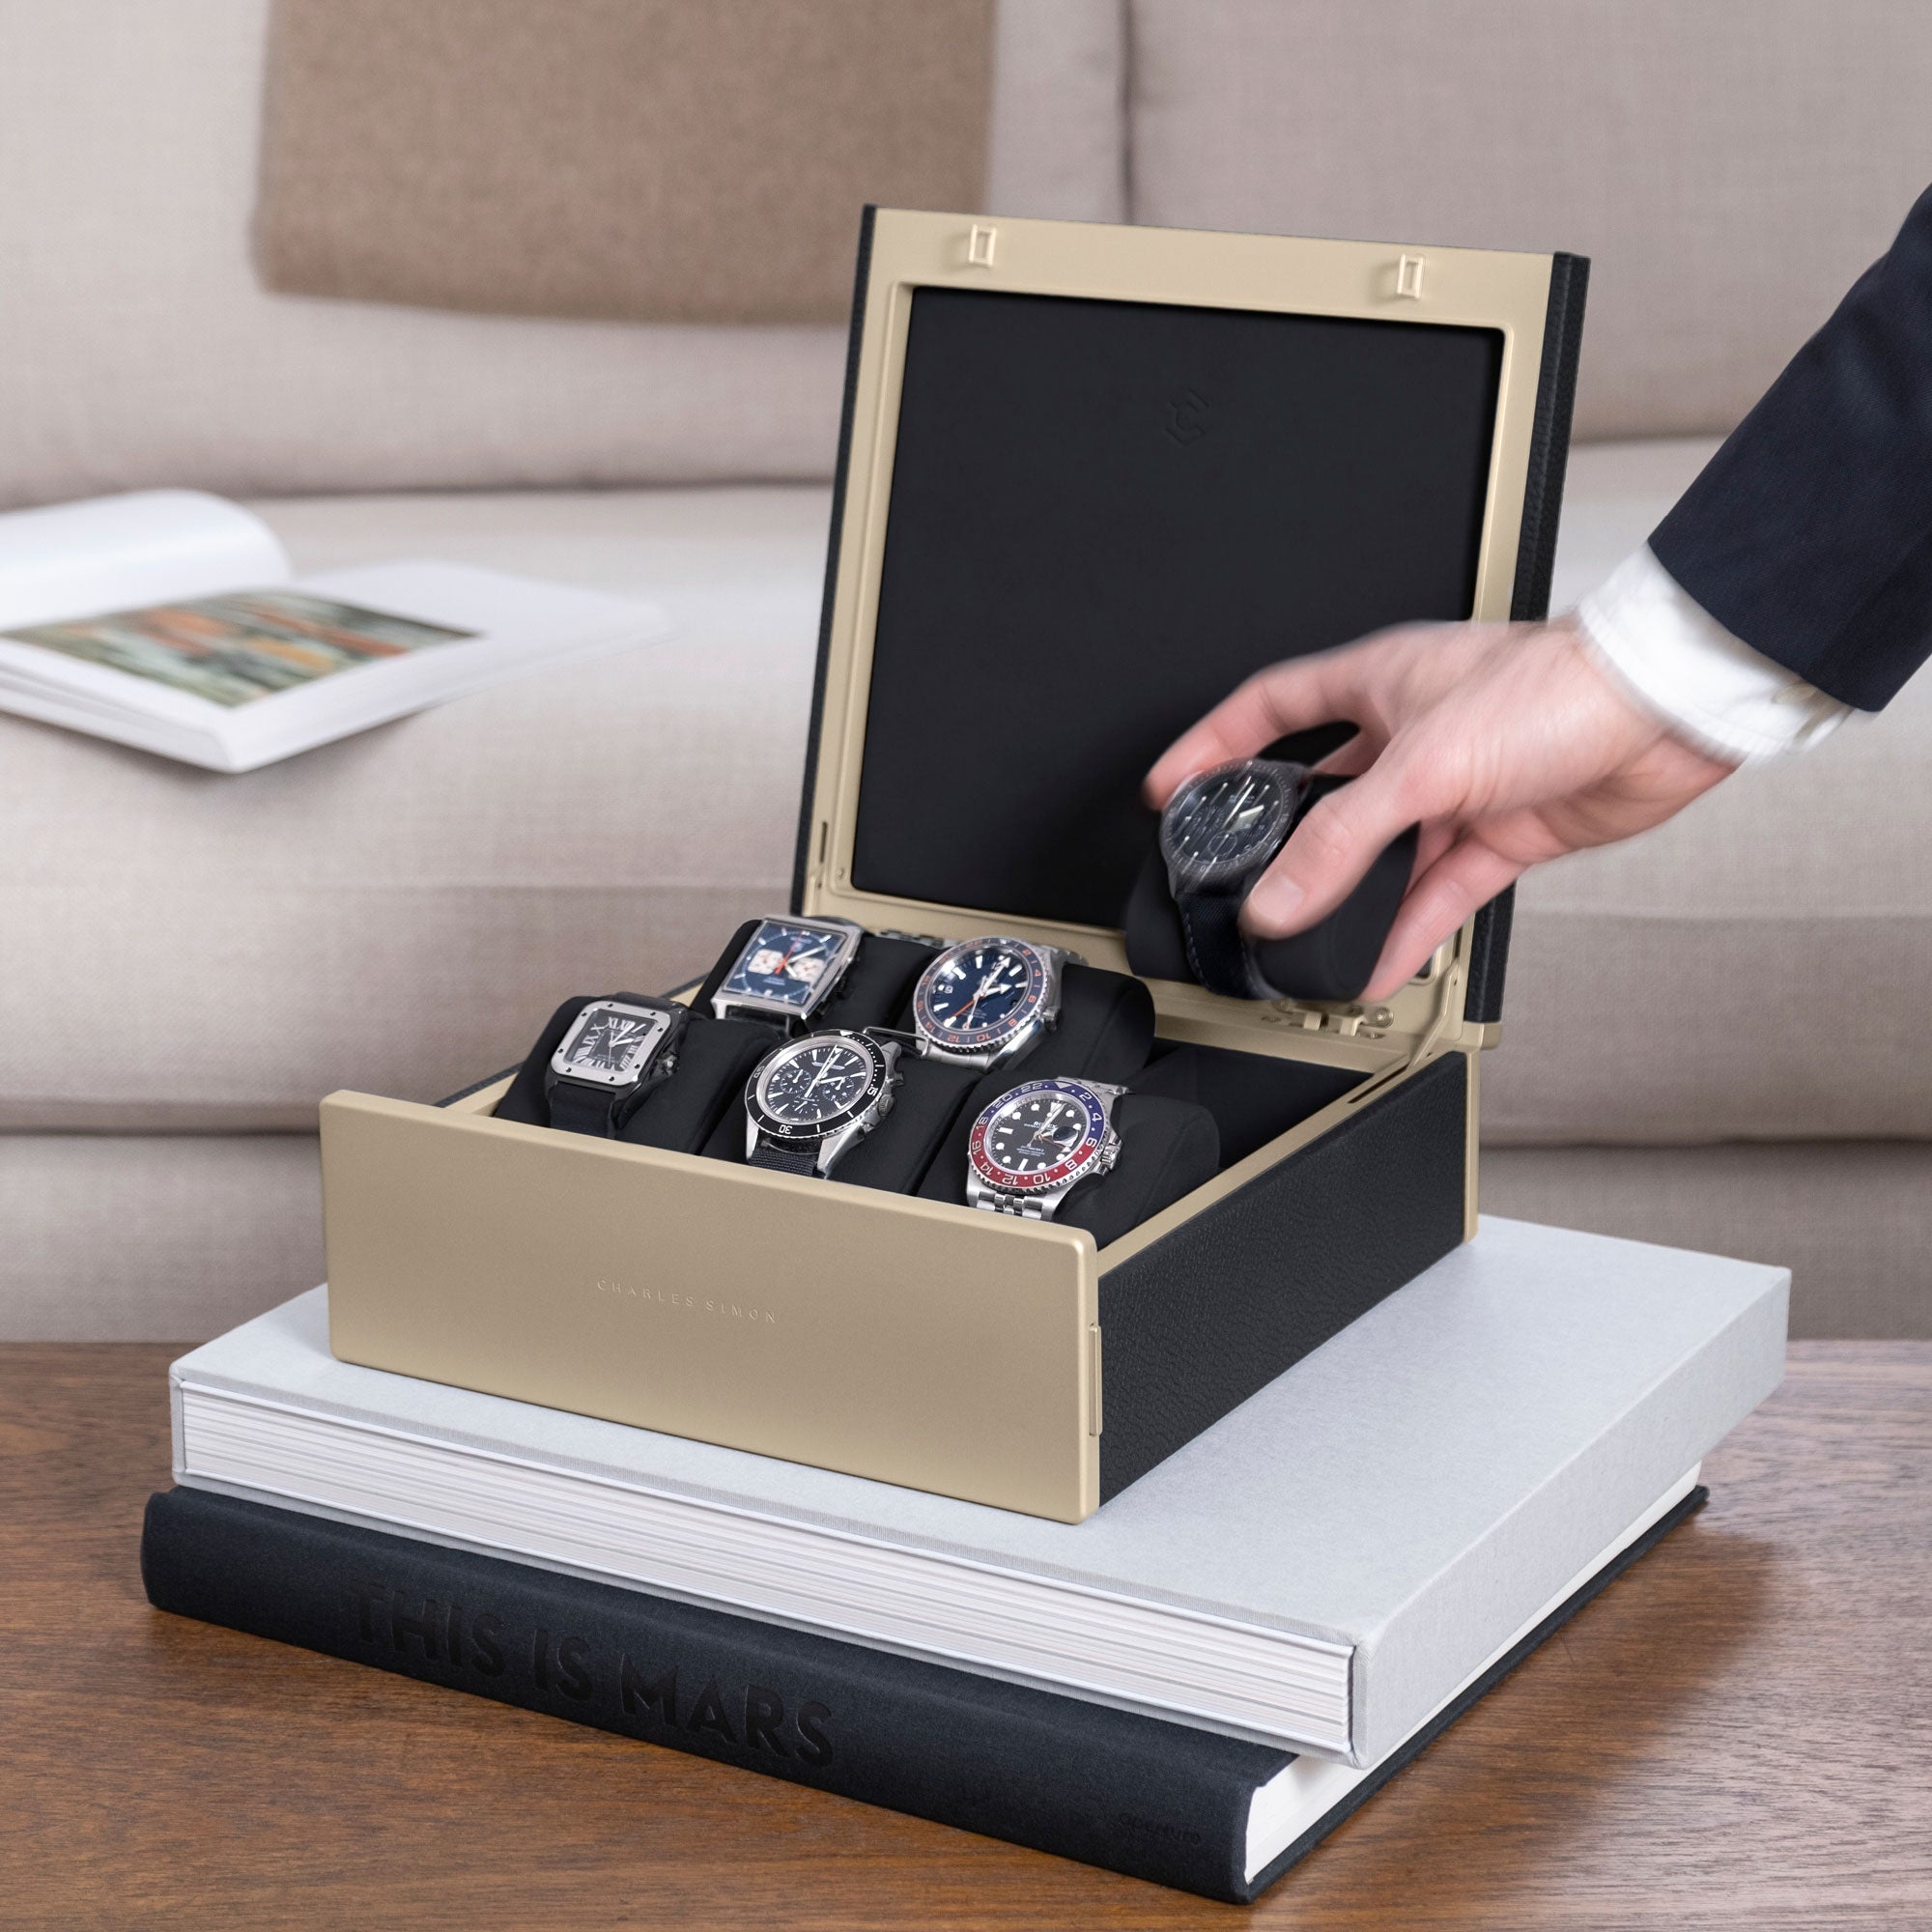 Lifestyle photo of man taking luxury watch from his gold Spence watch box in black leather, holding his watch collection of 6 watches